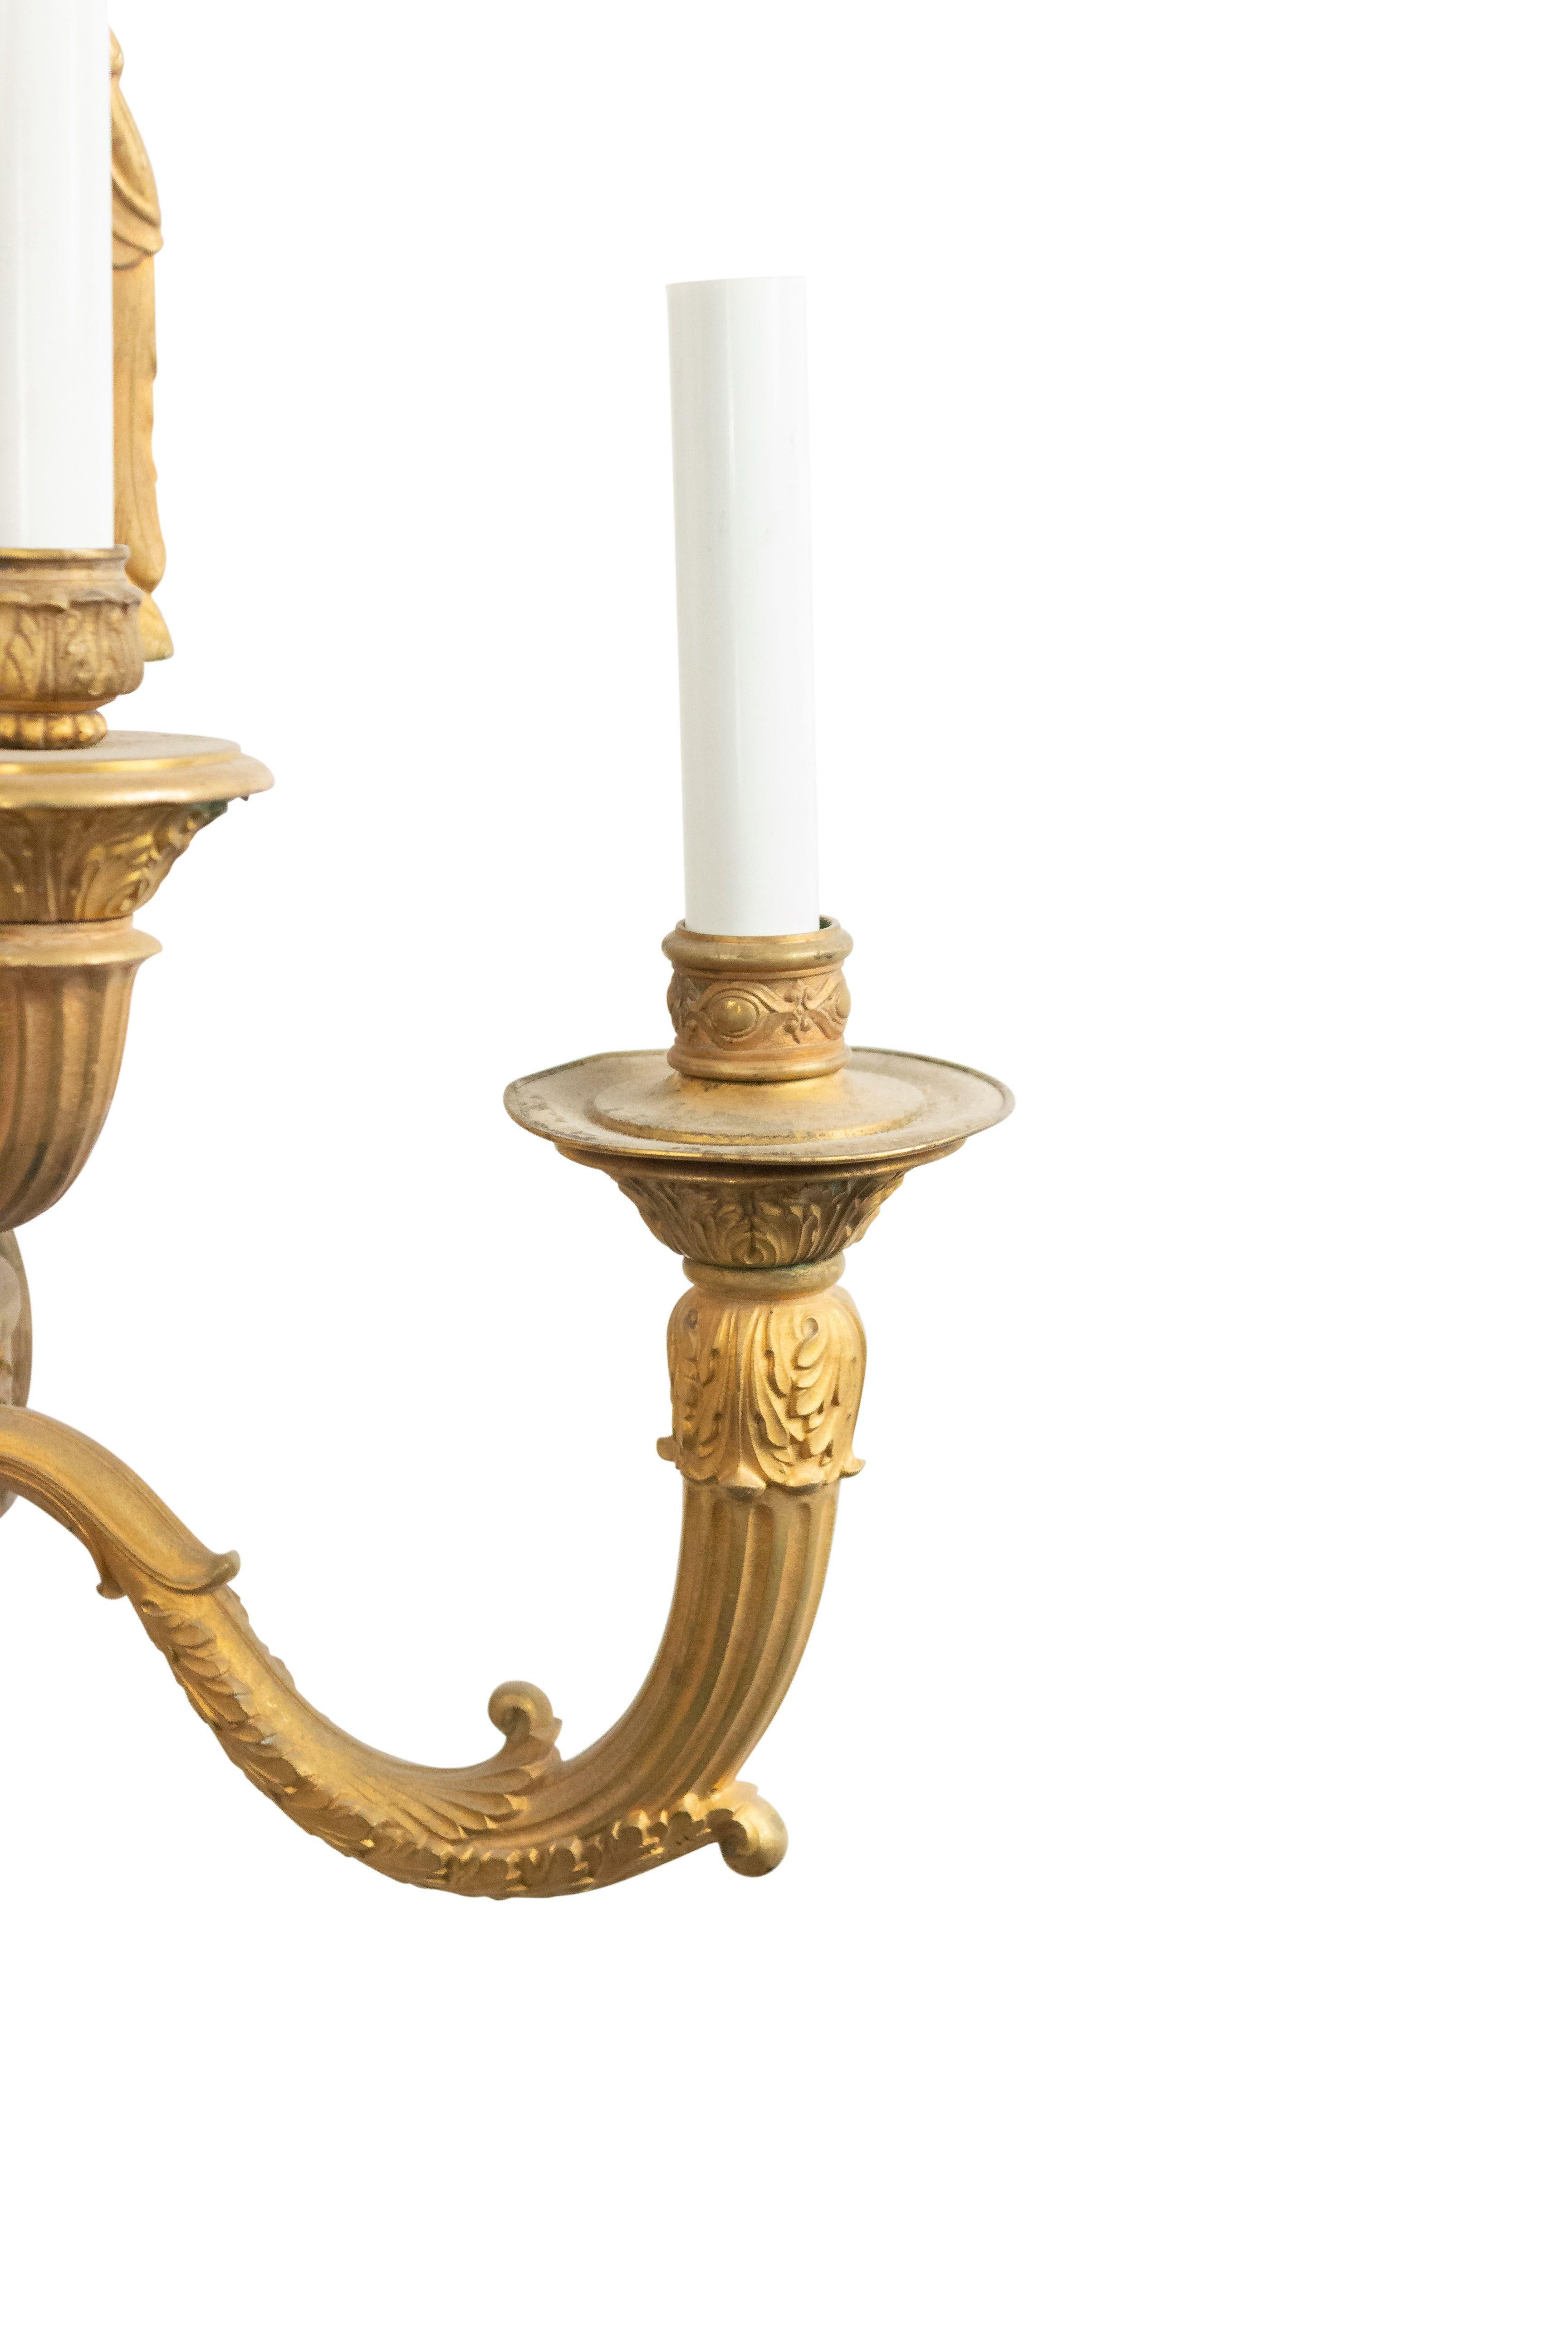 Pair of French Empire style bronze 5-arm wall sconces with swan top and double ball design (19th century).